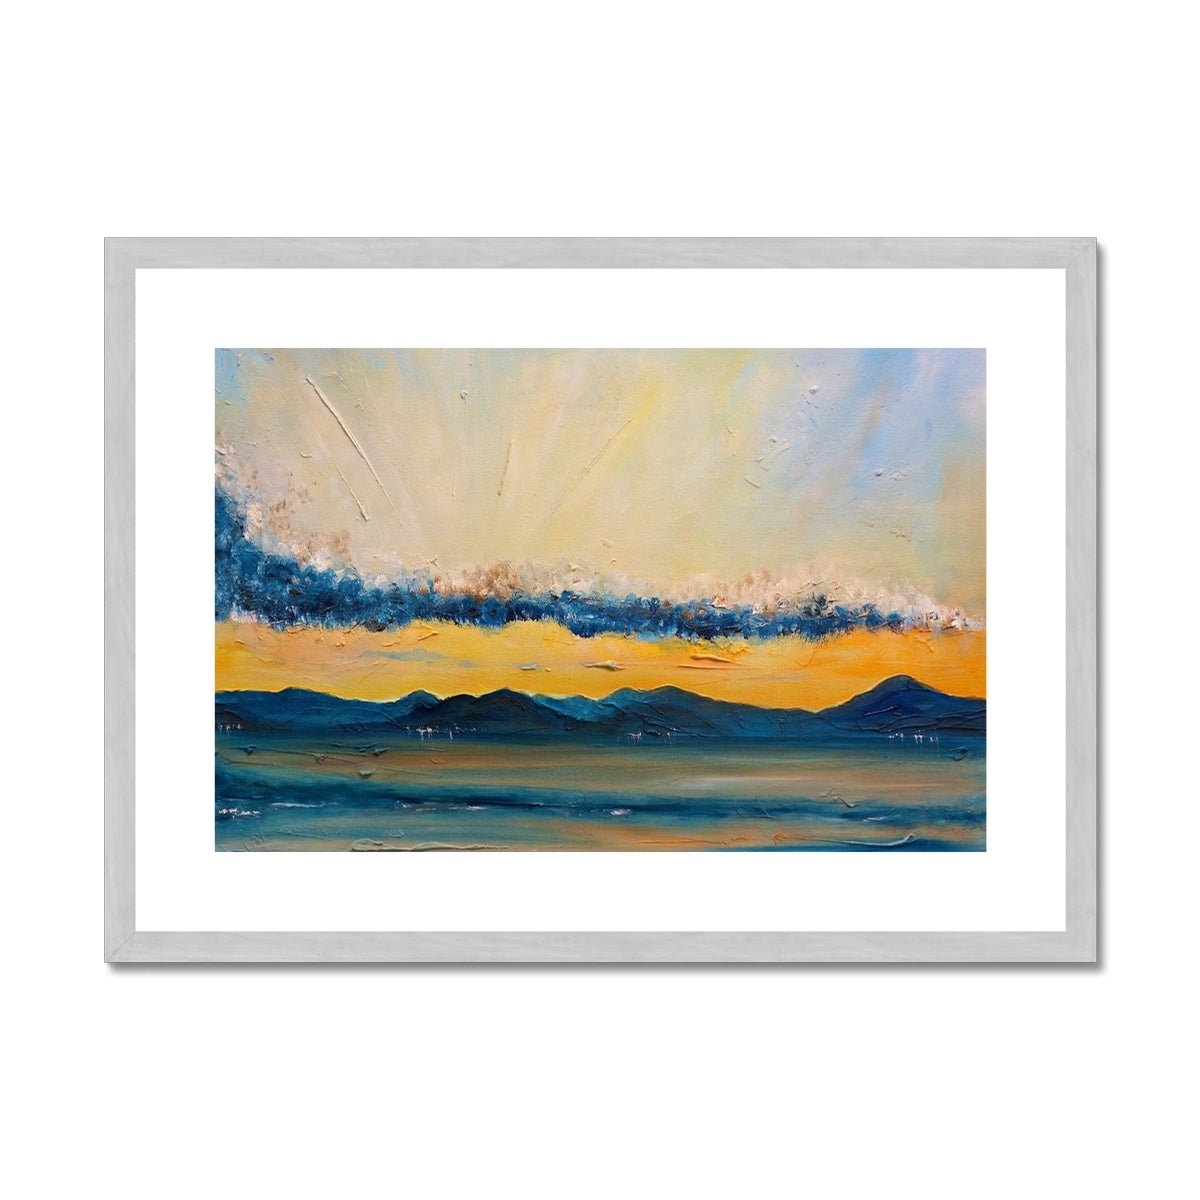 River Clyde From Skelmorlie Painting | Antique Framed & Mounted Prints From Scotland-Antique Framed & Mounted Prints-River Clyde Art Gallery-A2 Landscape-Silver Frame-Paintings, Prints, Homeware, Art Gifts From Scotland By Scottish Artist Kevin Hunter